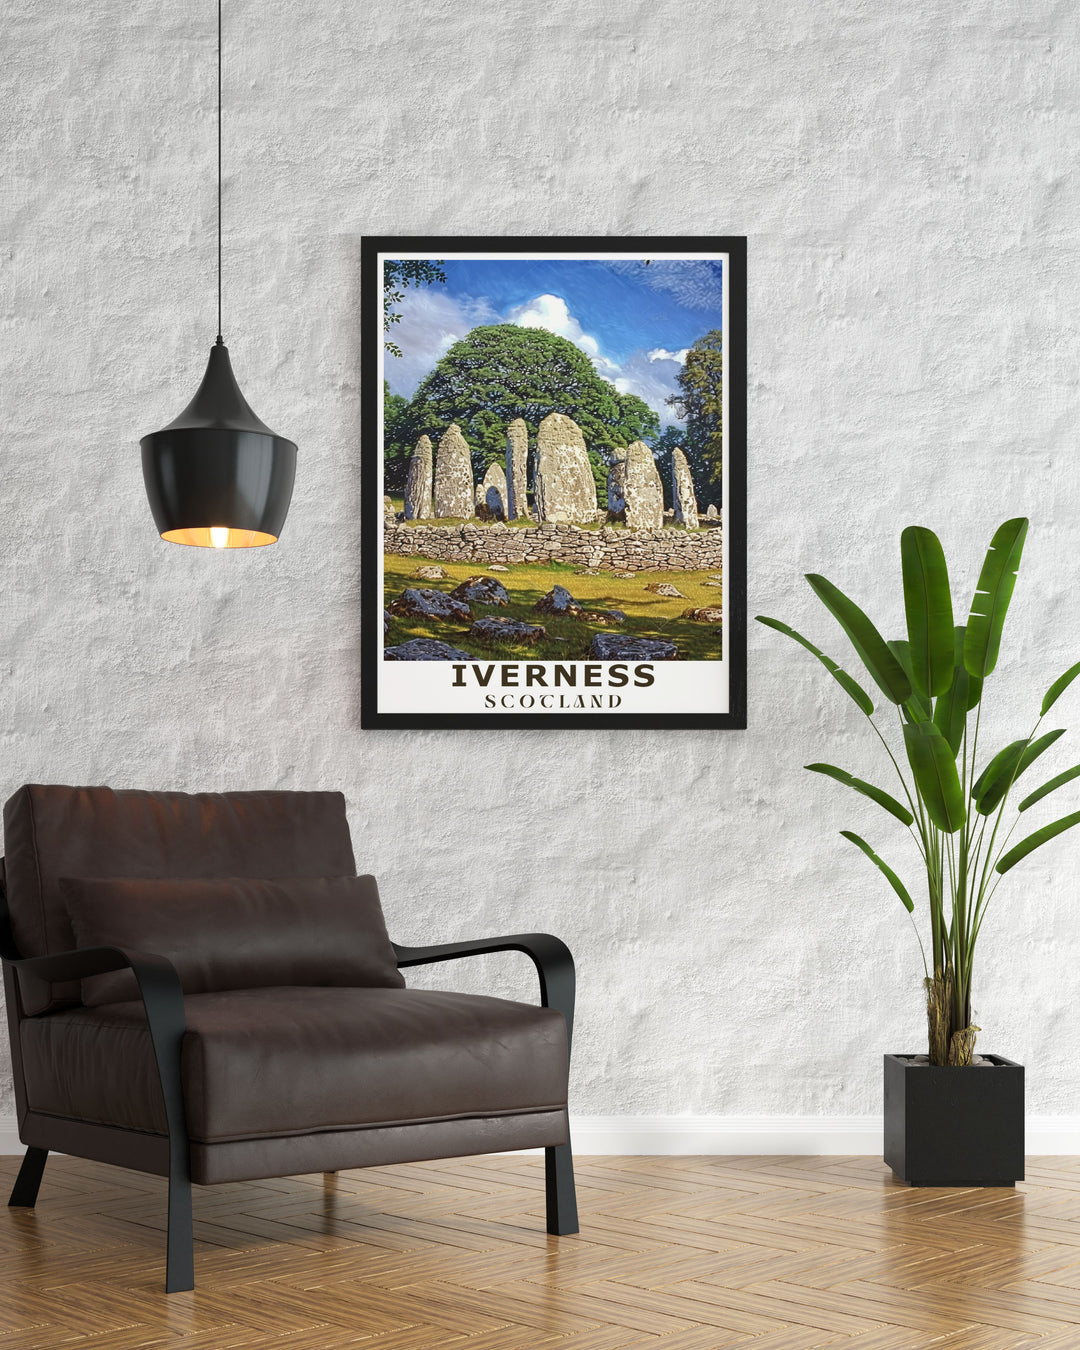 Vintage poster showcasing Inverness and its vibrant community, historical landmarks, and picturesque scenery, perfect for any travel enthusiast.